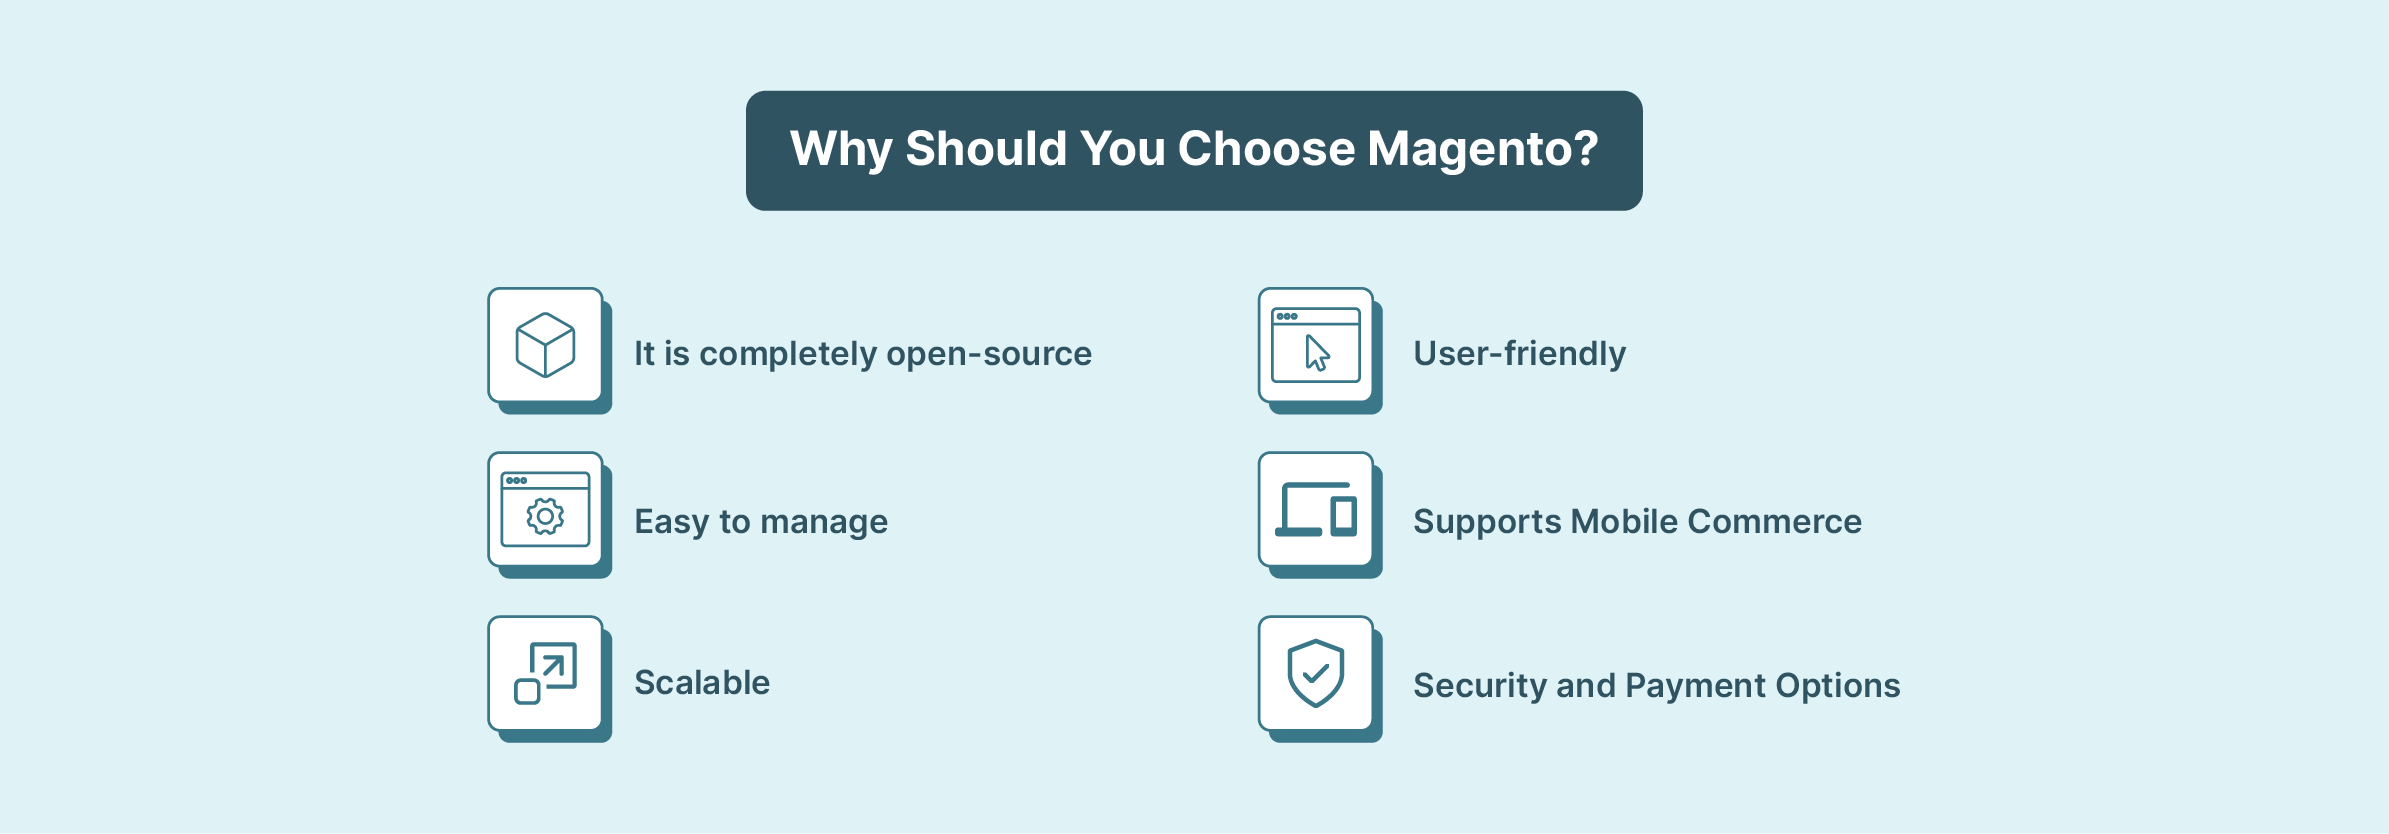 Benefits of Magento for e-commerce: Flexibility, Scalability, and Robustness.